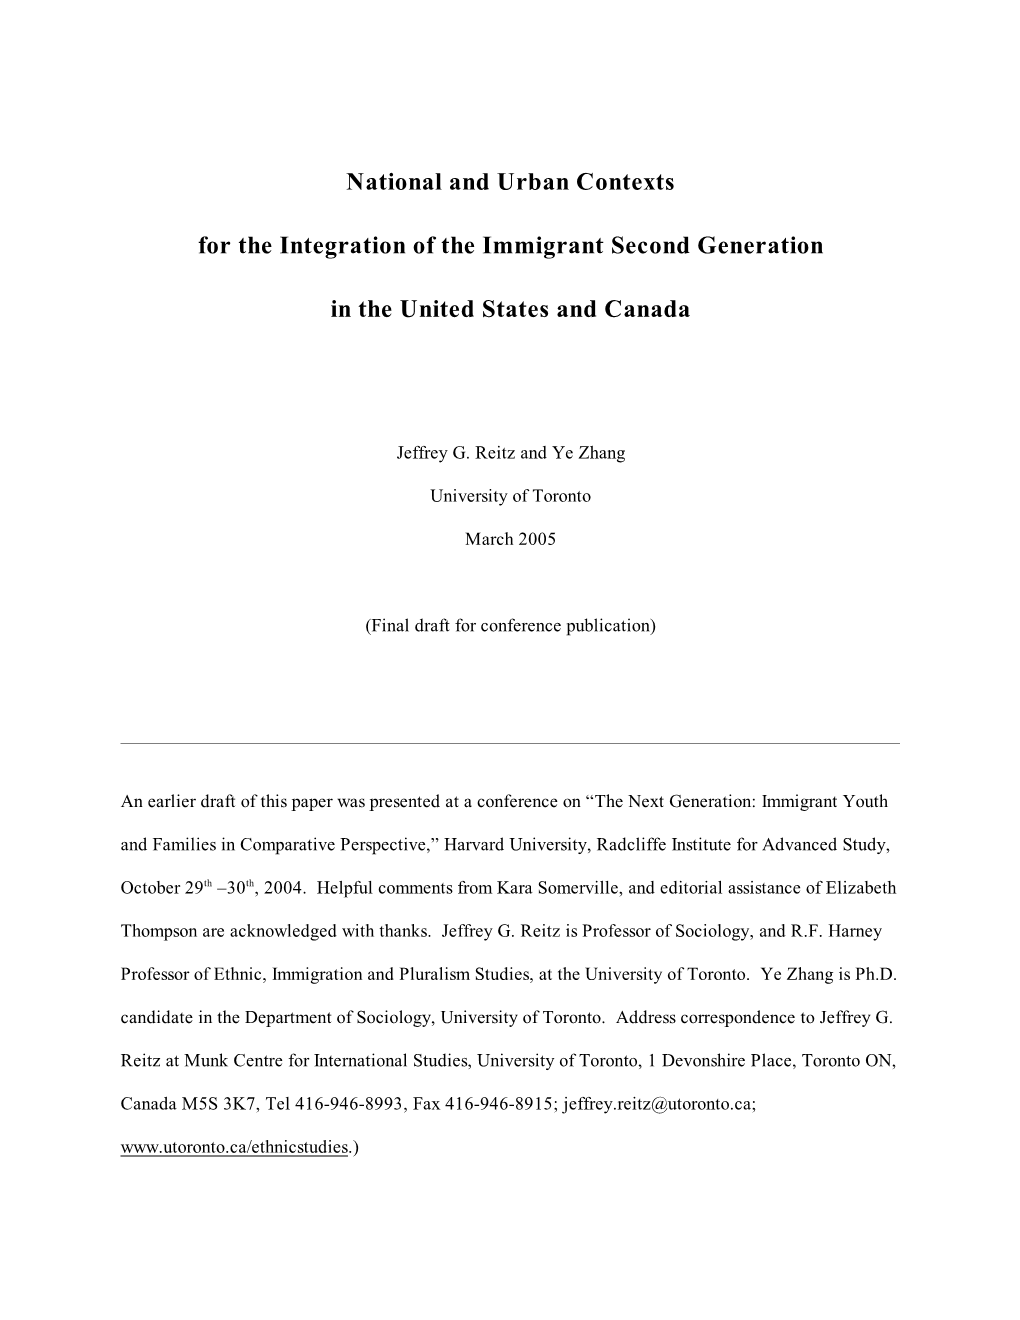 National and Urban Contexts for the Integration of the Immigrant Second